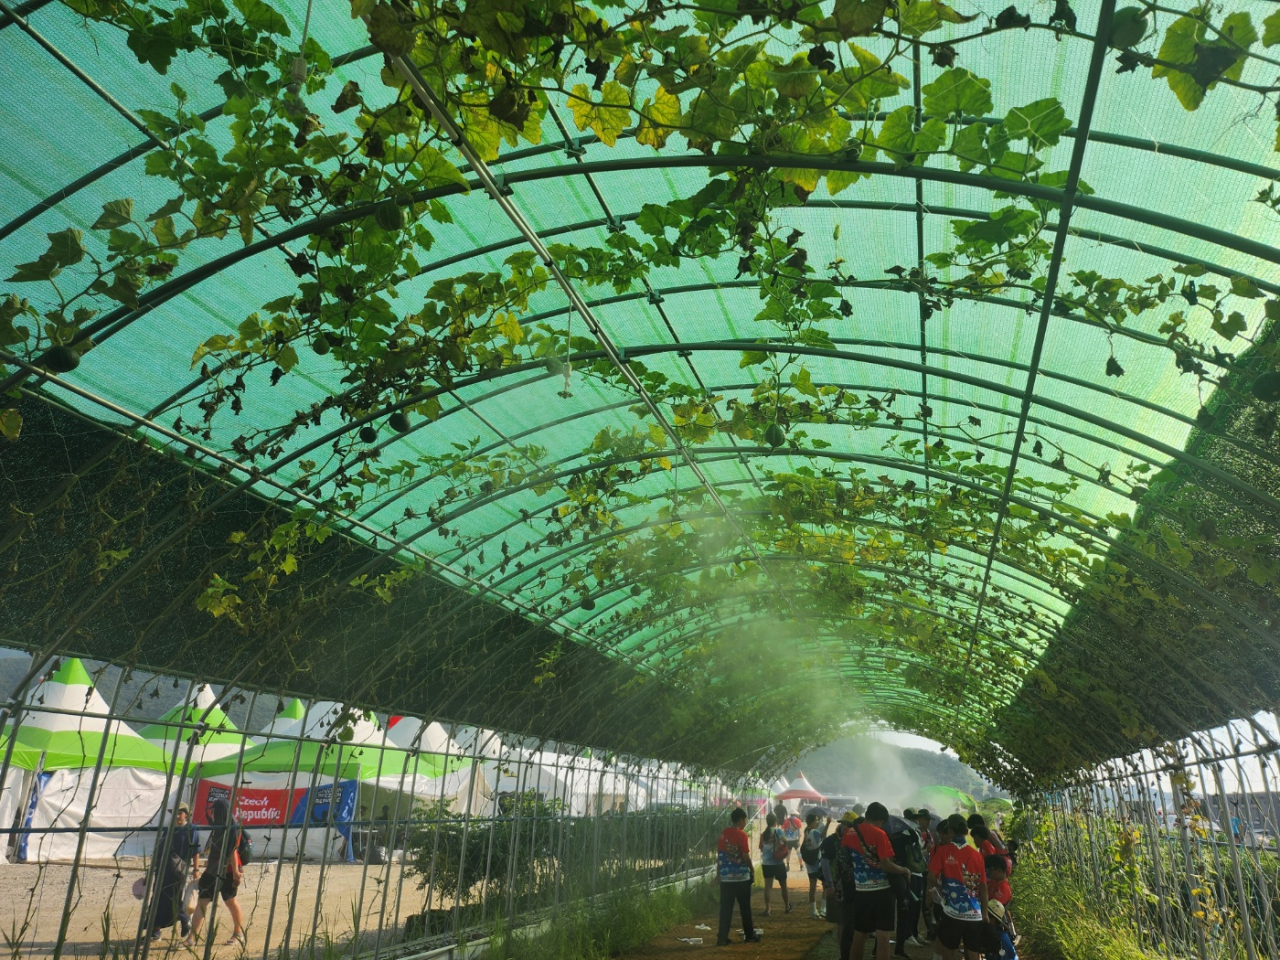 A fog-spraying facility cools down Scouts in a vine tunnel. (Lee Jung-youn/The Korea Herald)